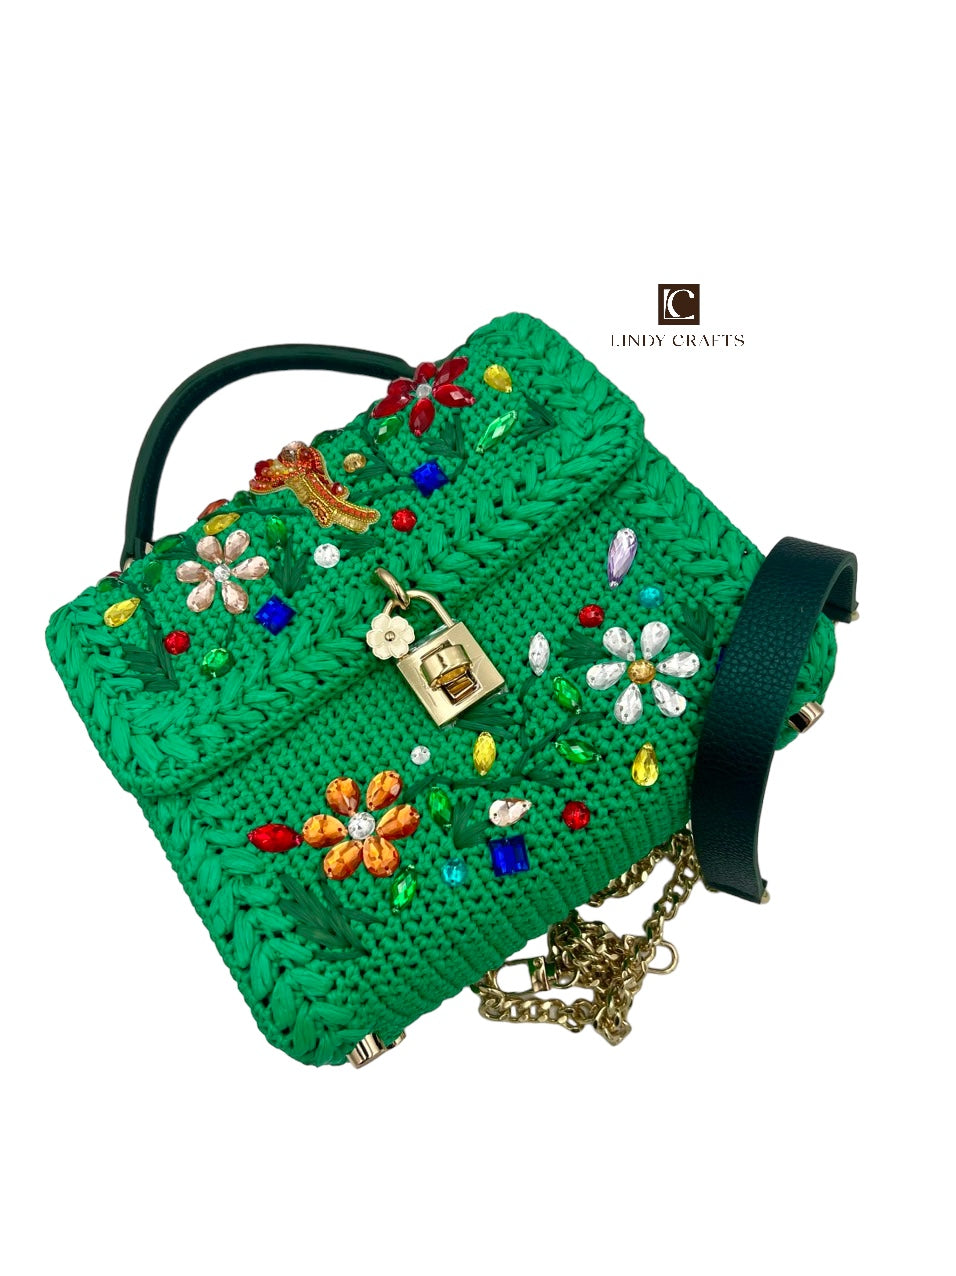 Golden Blossom Bag in Malachite Green - Made to order